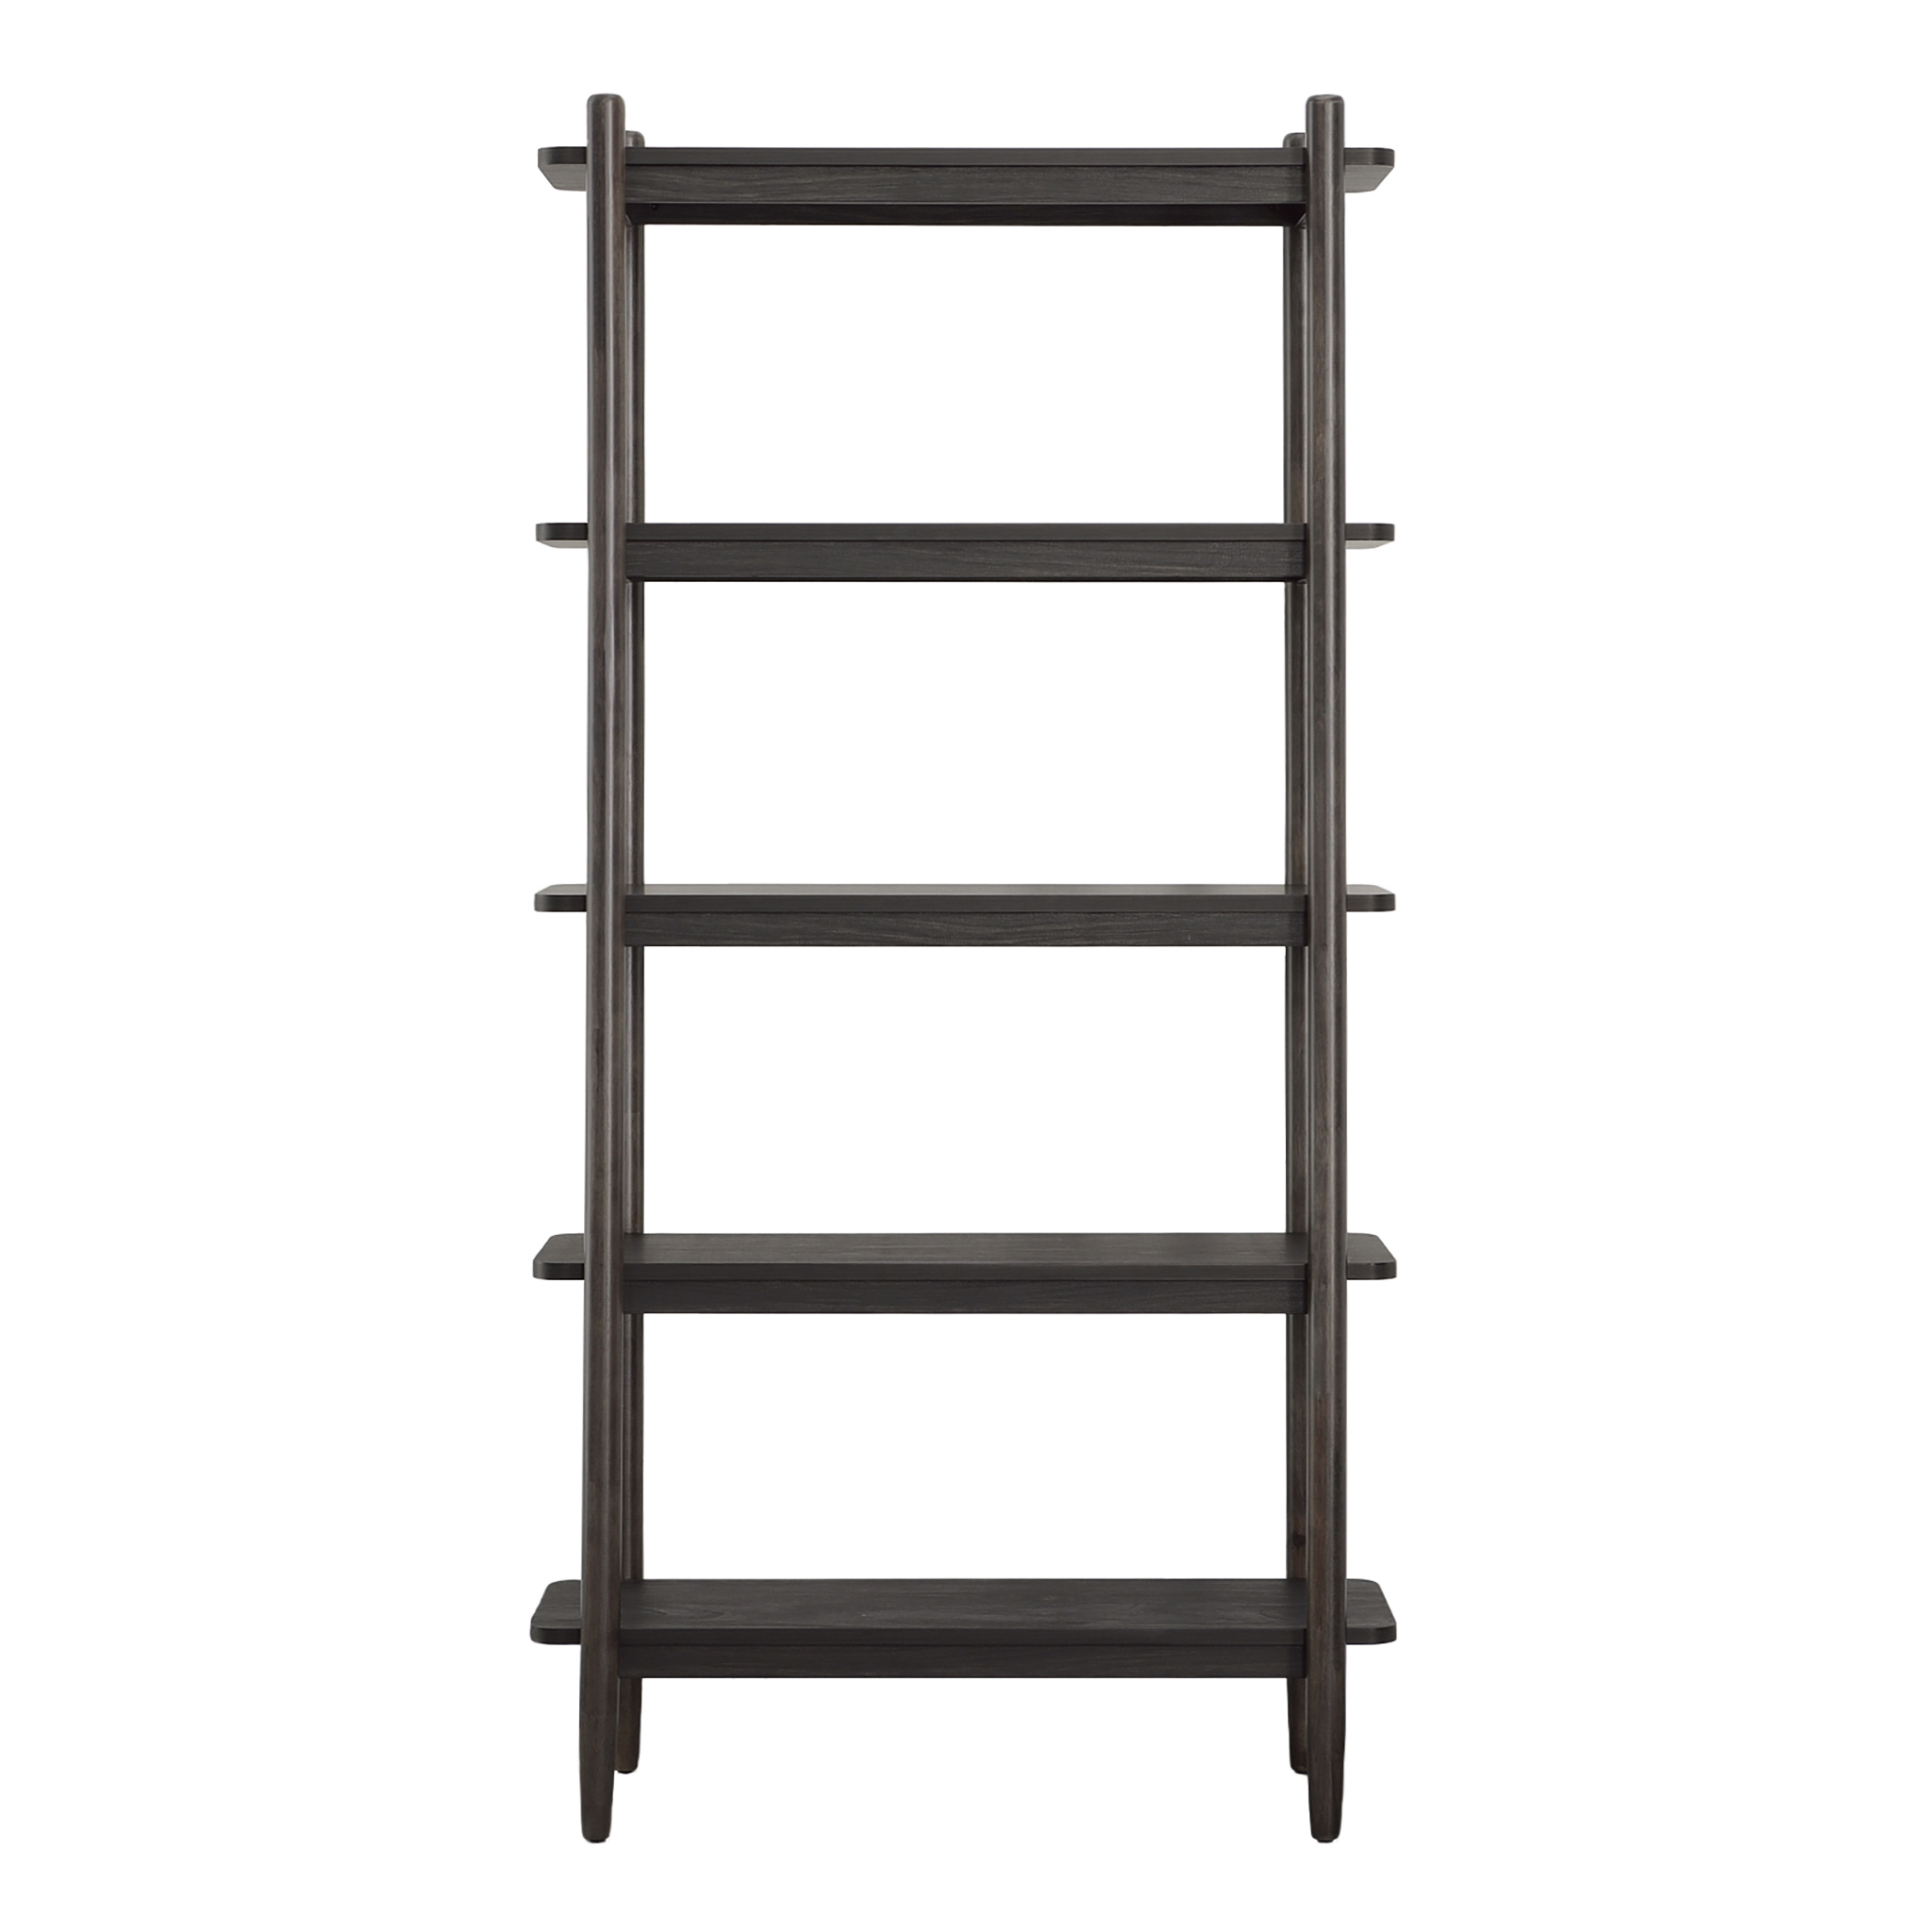 Better Homes & Gardens Springwood 5 Shelf Bookcase with Solid Wood Frame, Charcoal Finish - image 3 of 10